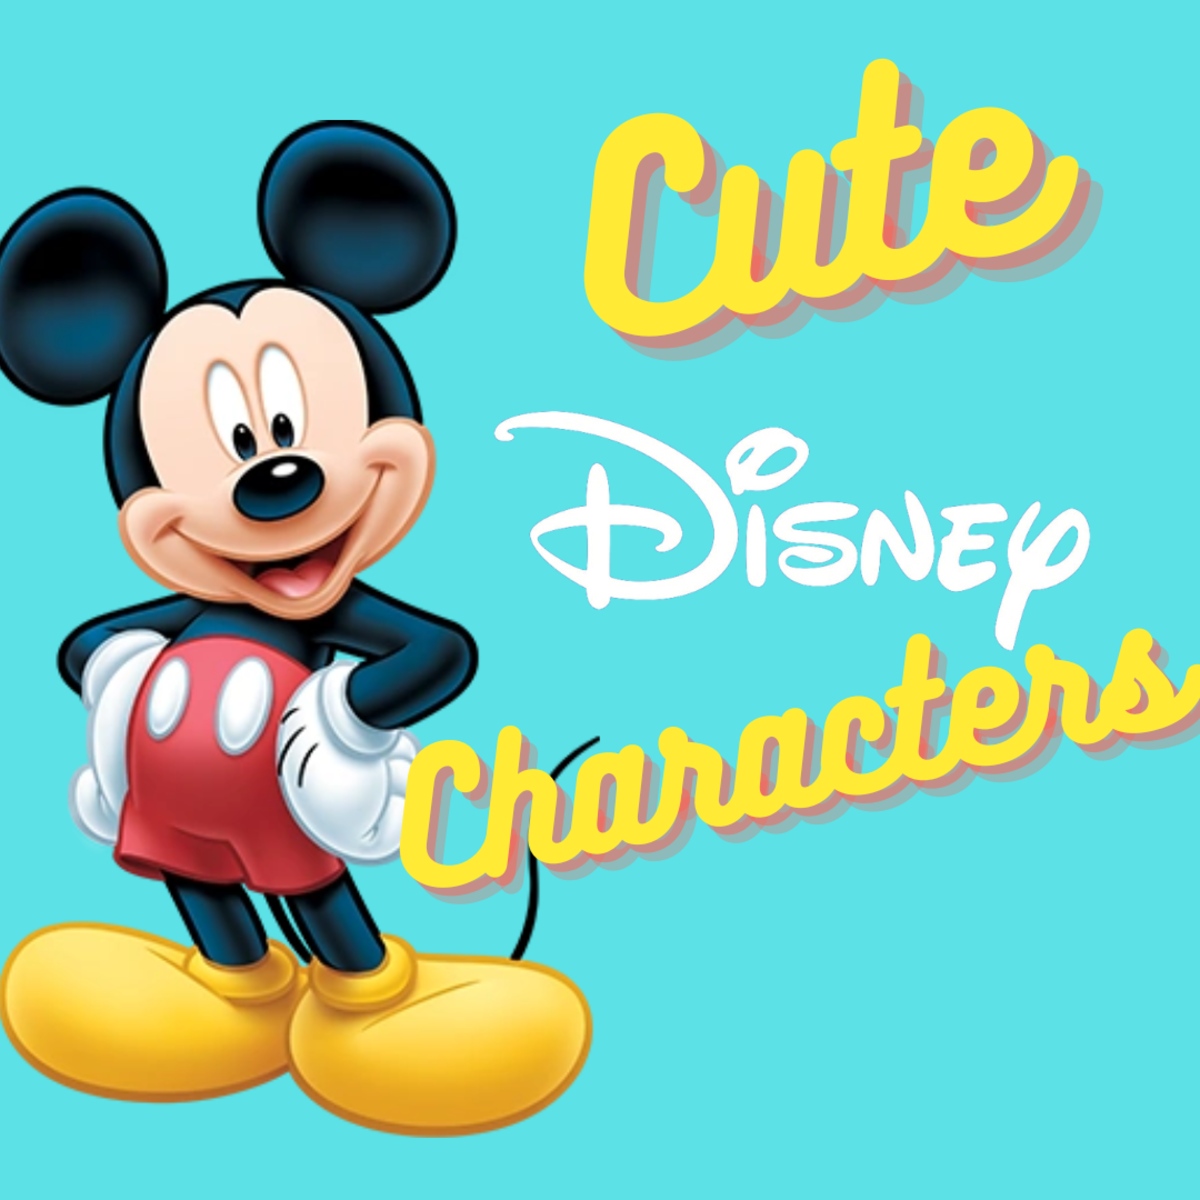 Who's the cutest Disney character ever? Read the article and vote below!